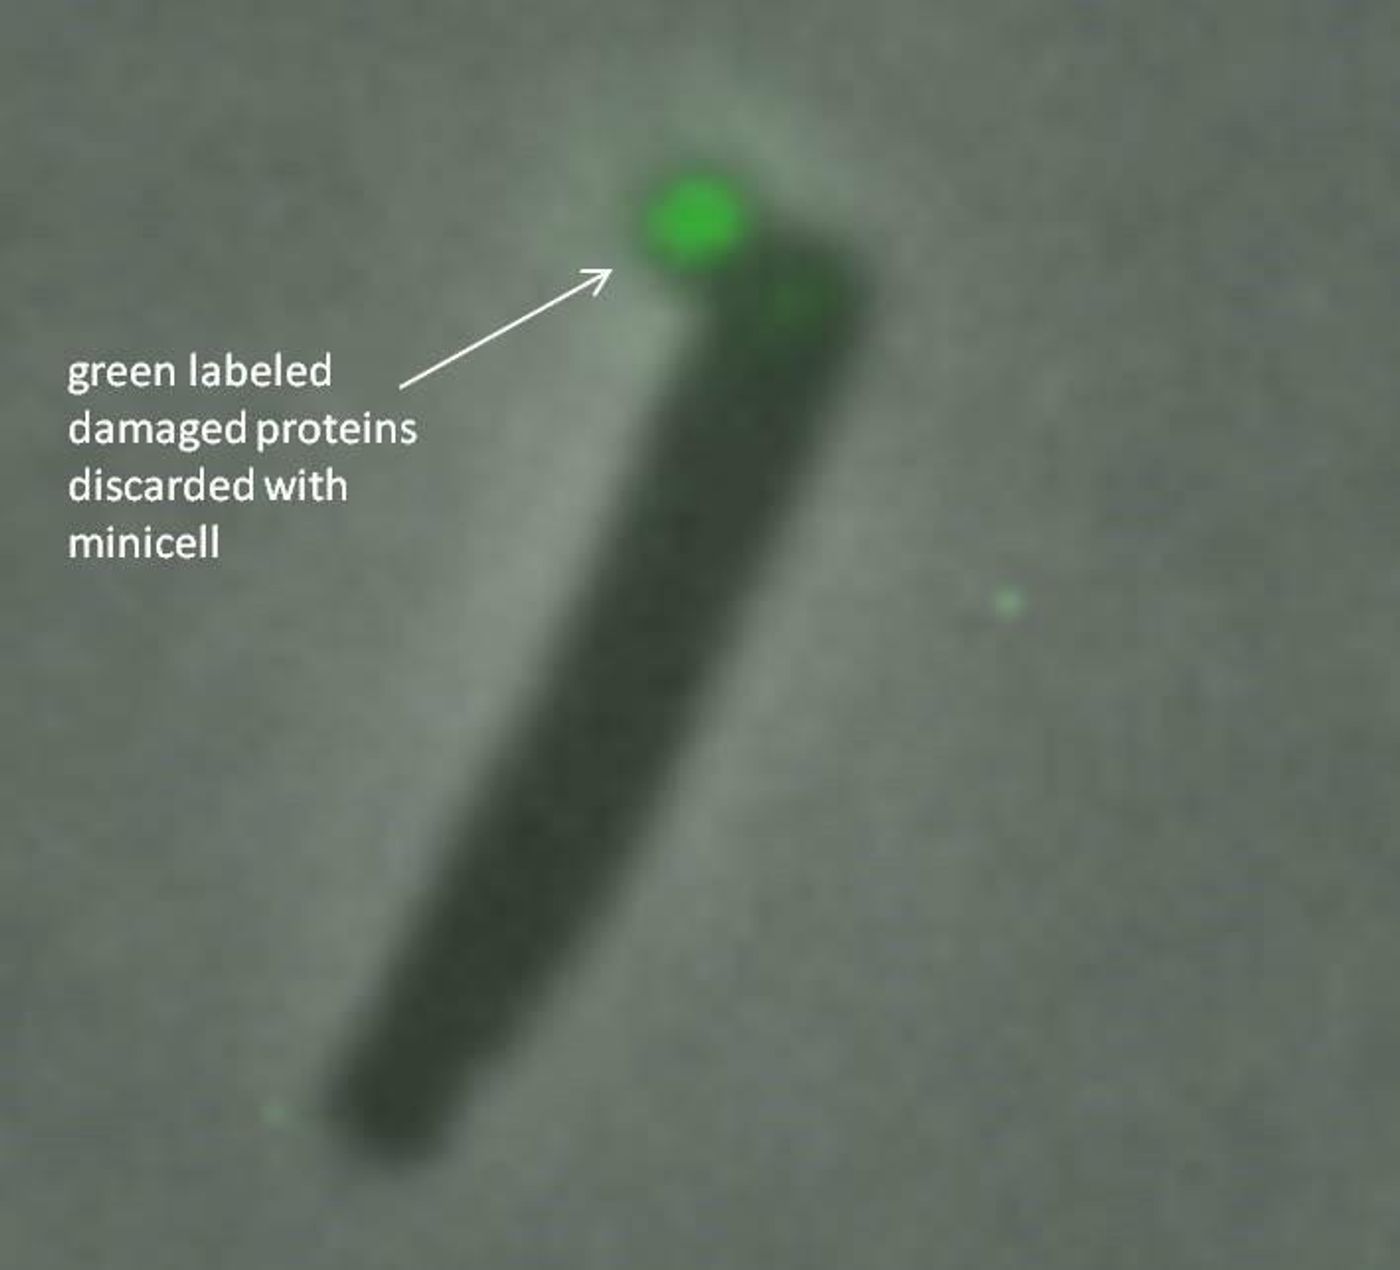 These are bacteria discard damaged proteins inside a fluorescent green-labeled minicell. / Credit: Chao Lab, UC San Diego